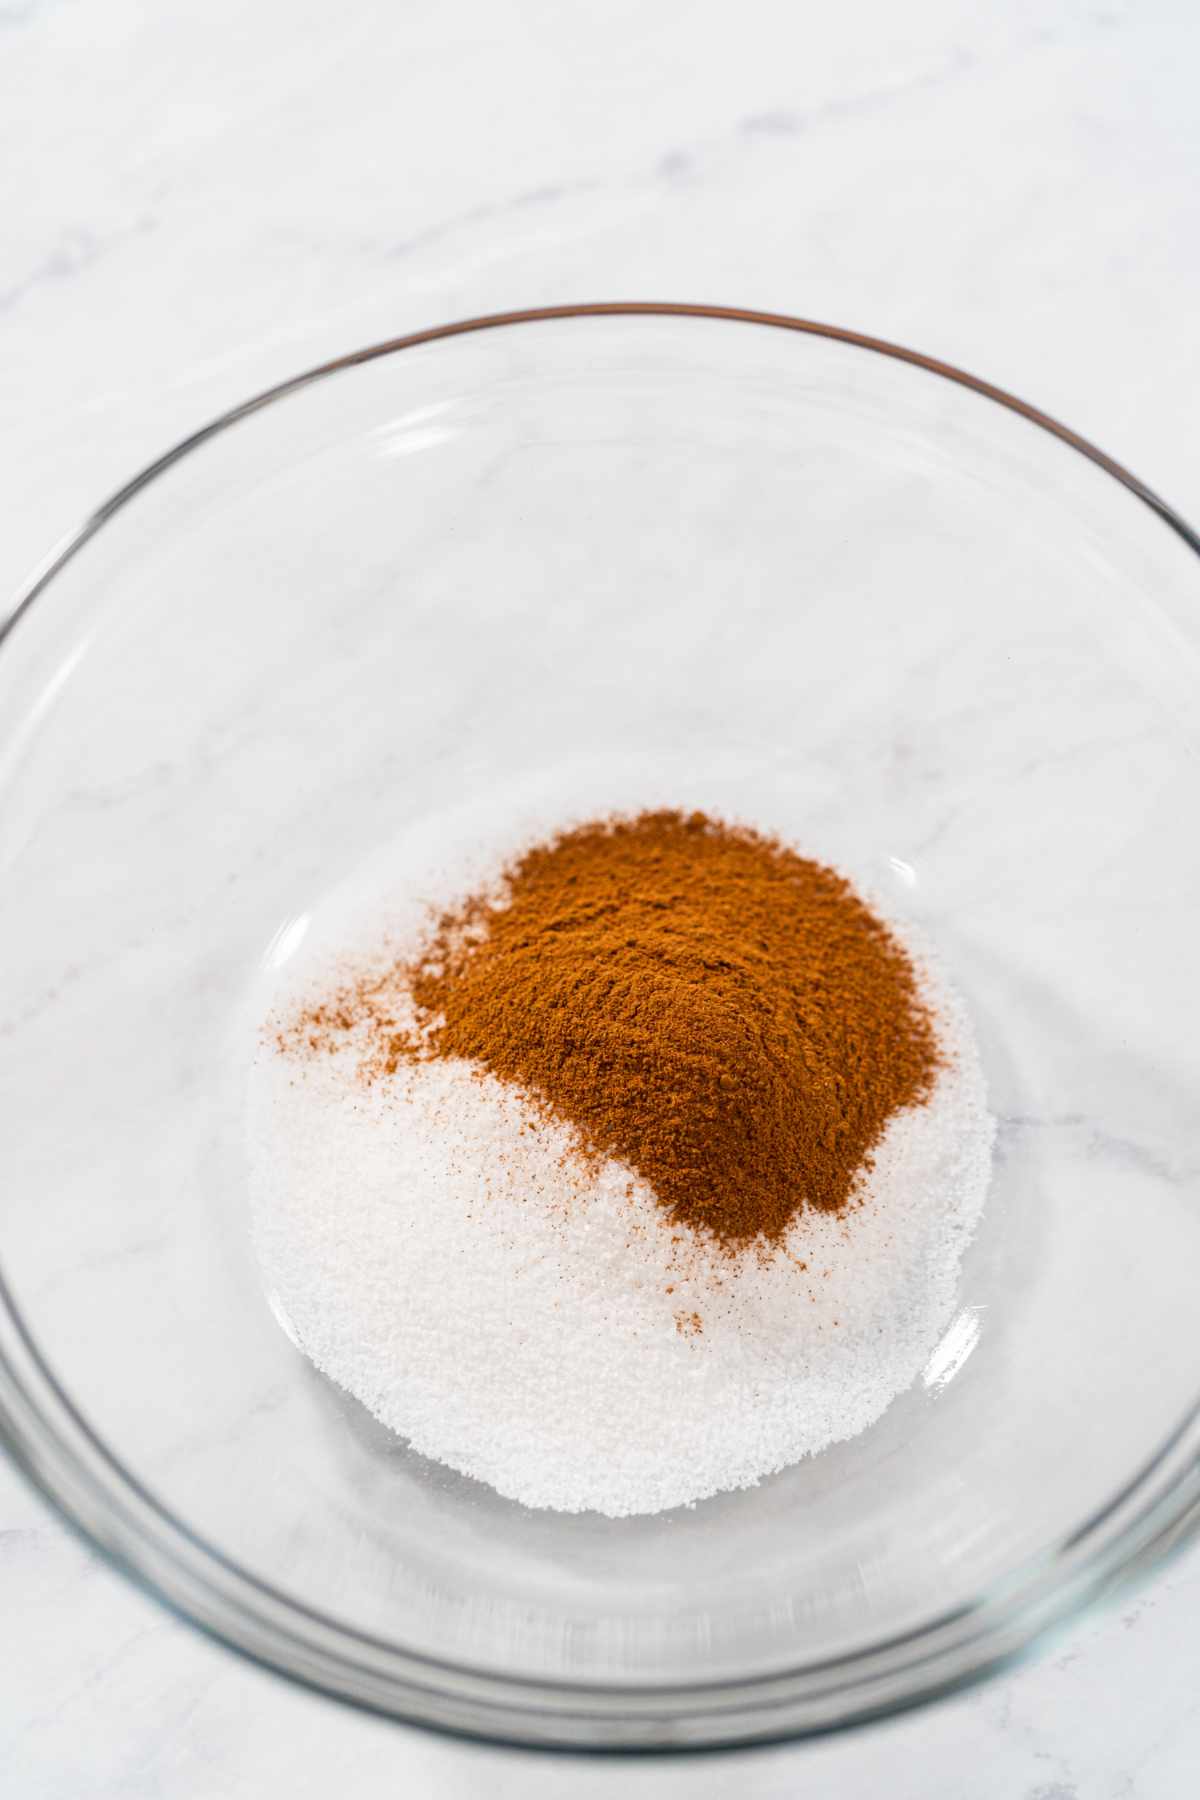 white sugar added to mixing bowl with ground cinnamon.